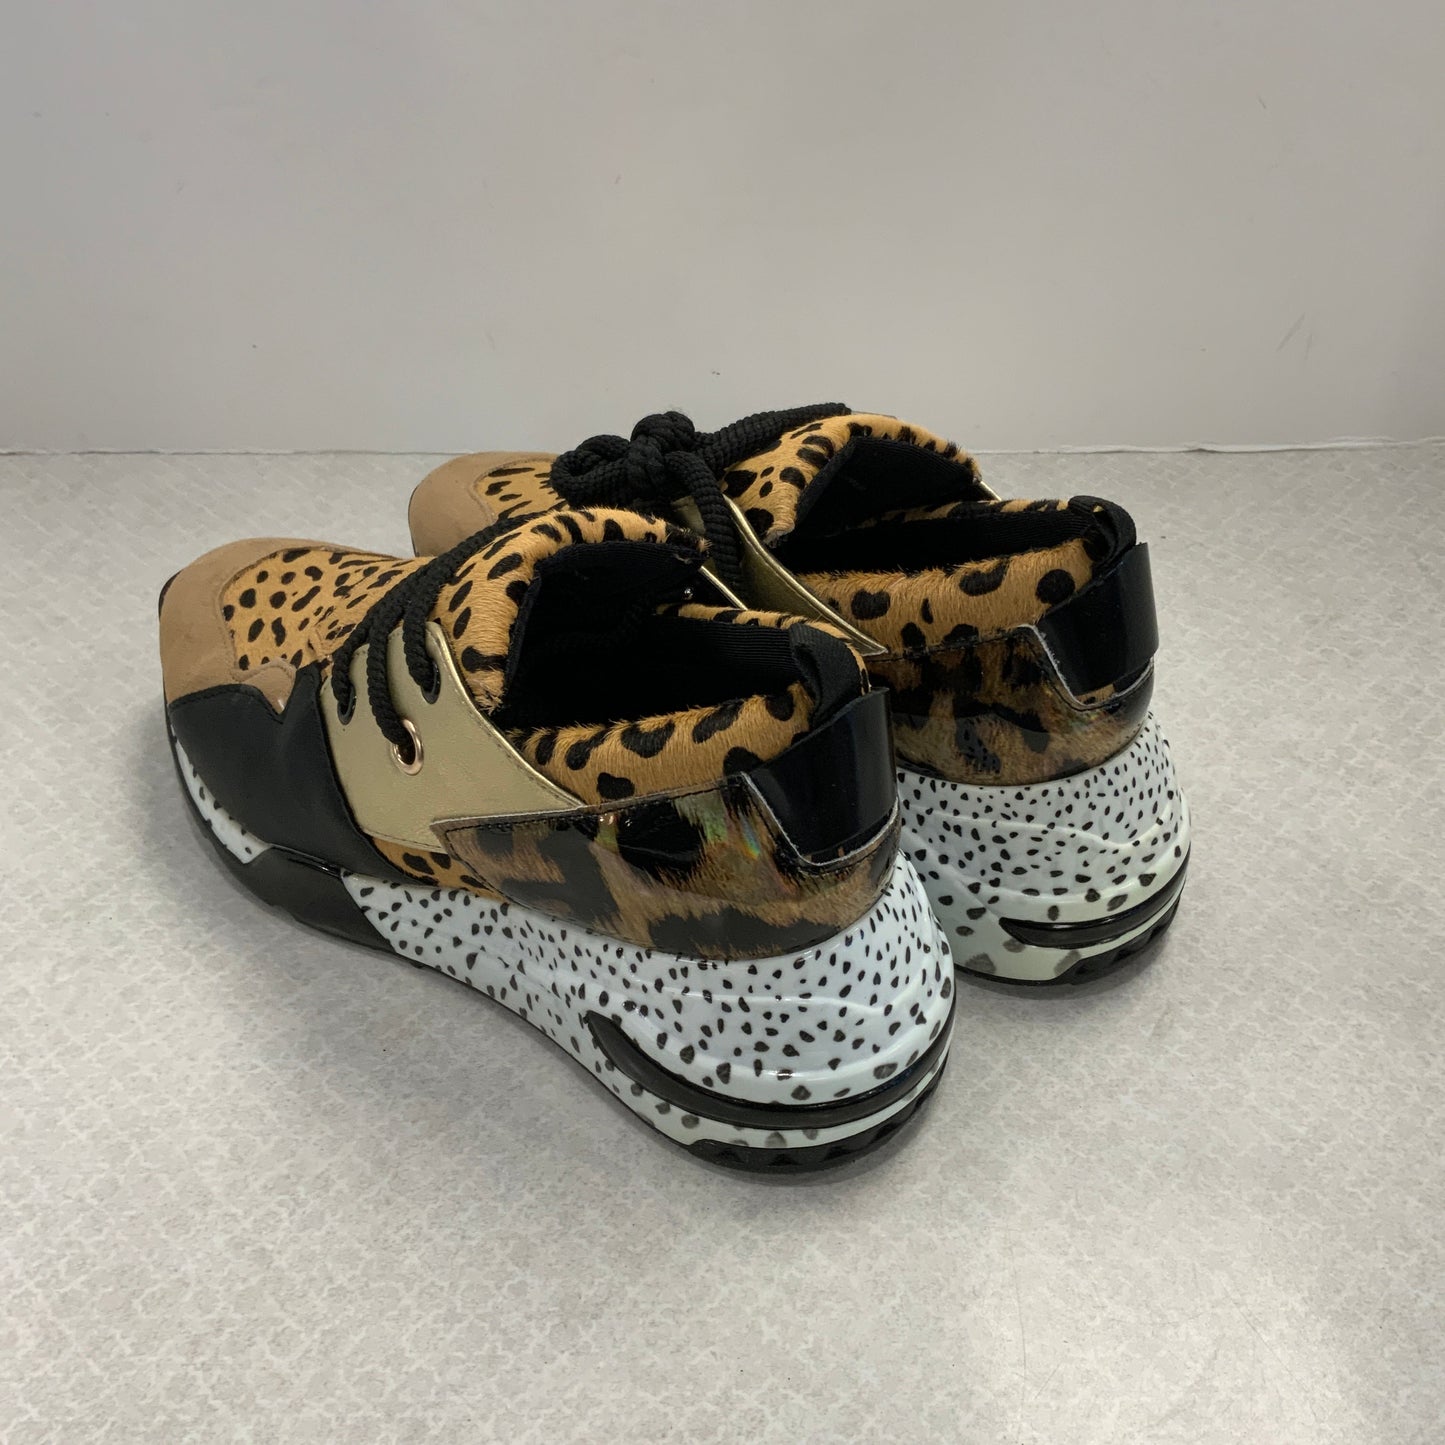 Animal Print Shoes Sneakers Steve Madden, Size 8